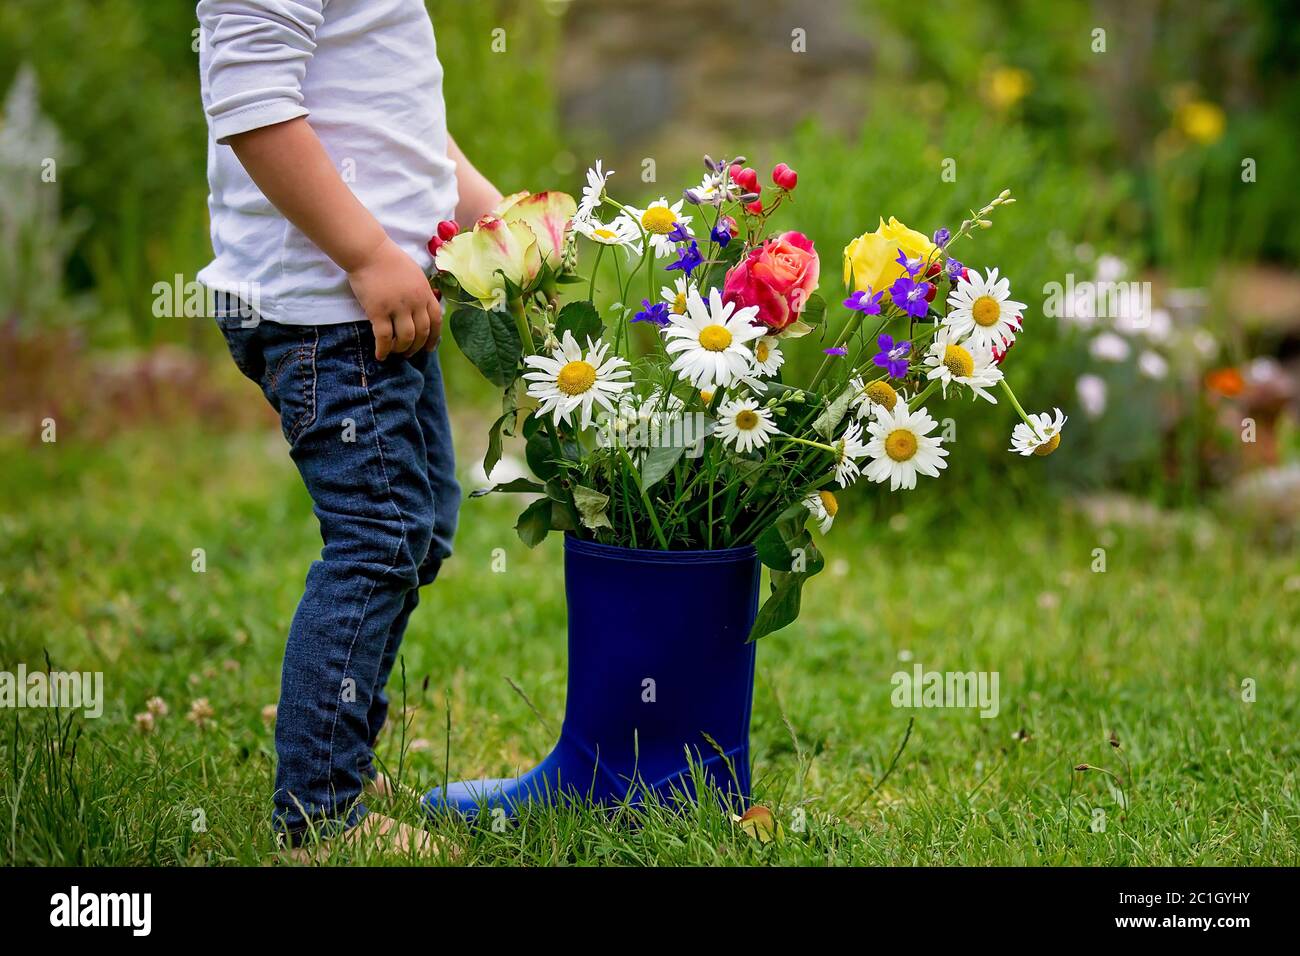 Child holding rubber boots with beautiful flowers in garden Stock Photo